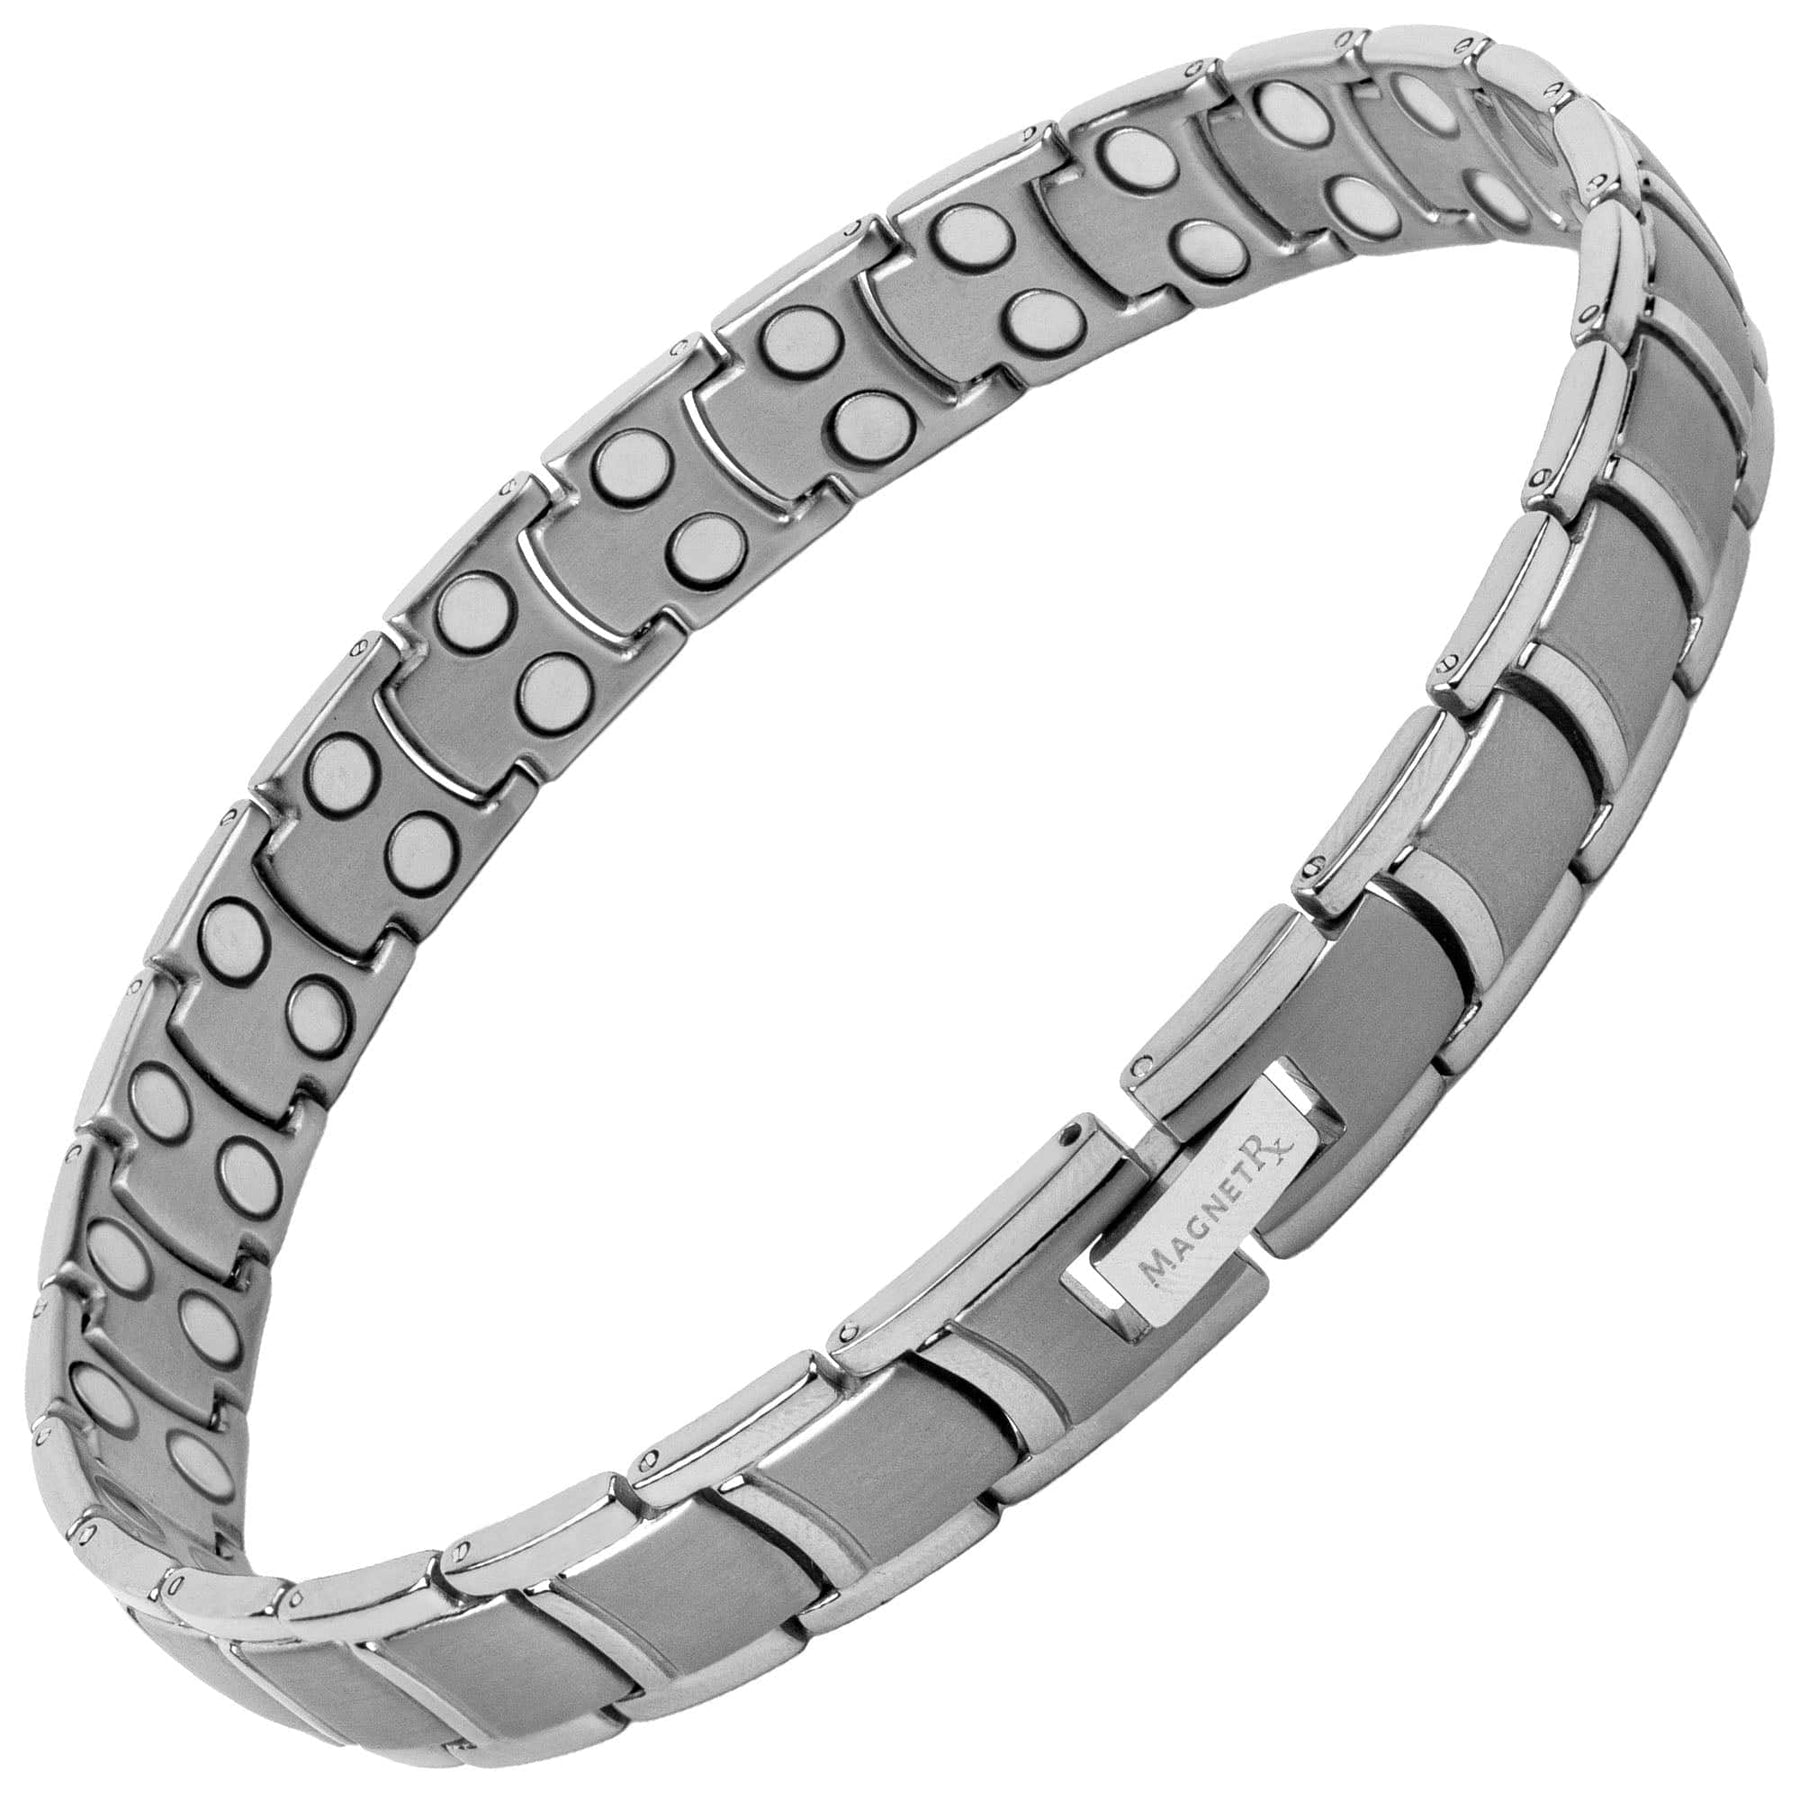 Ultra Strength Titanium Magnetic Therapy Anklet for Men (Silver)